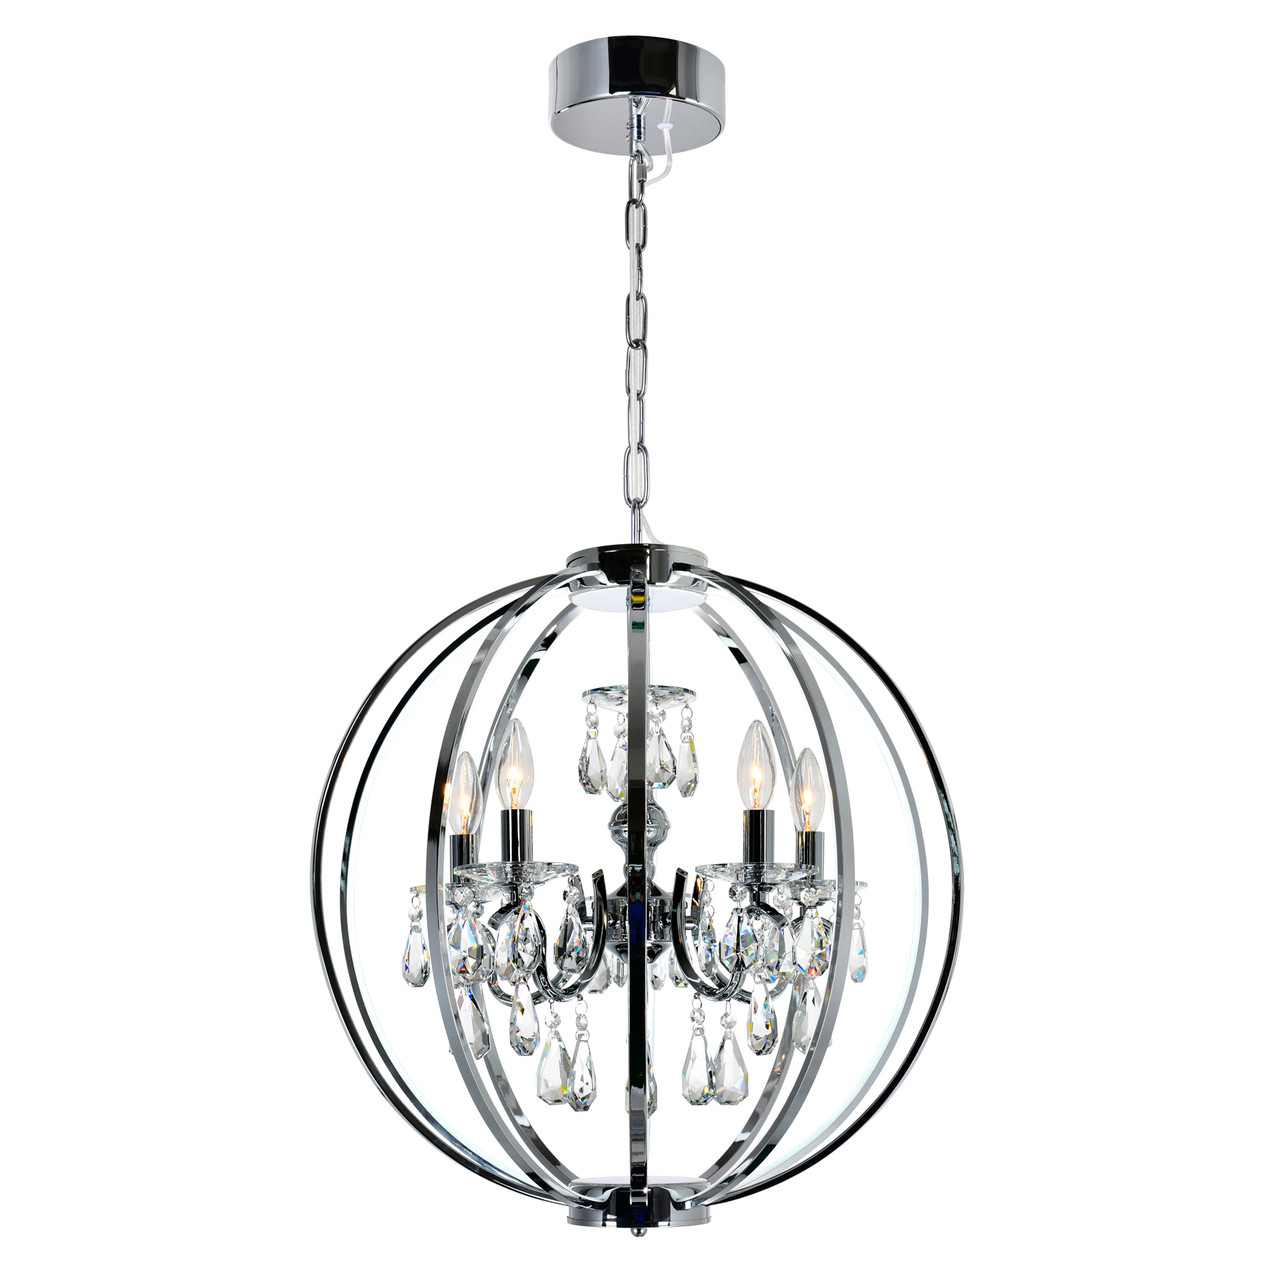 CWI LIGHTING 5025P22C-5 5 Light Up Chandelier with Chrome finish